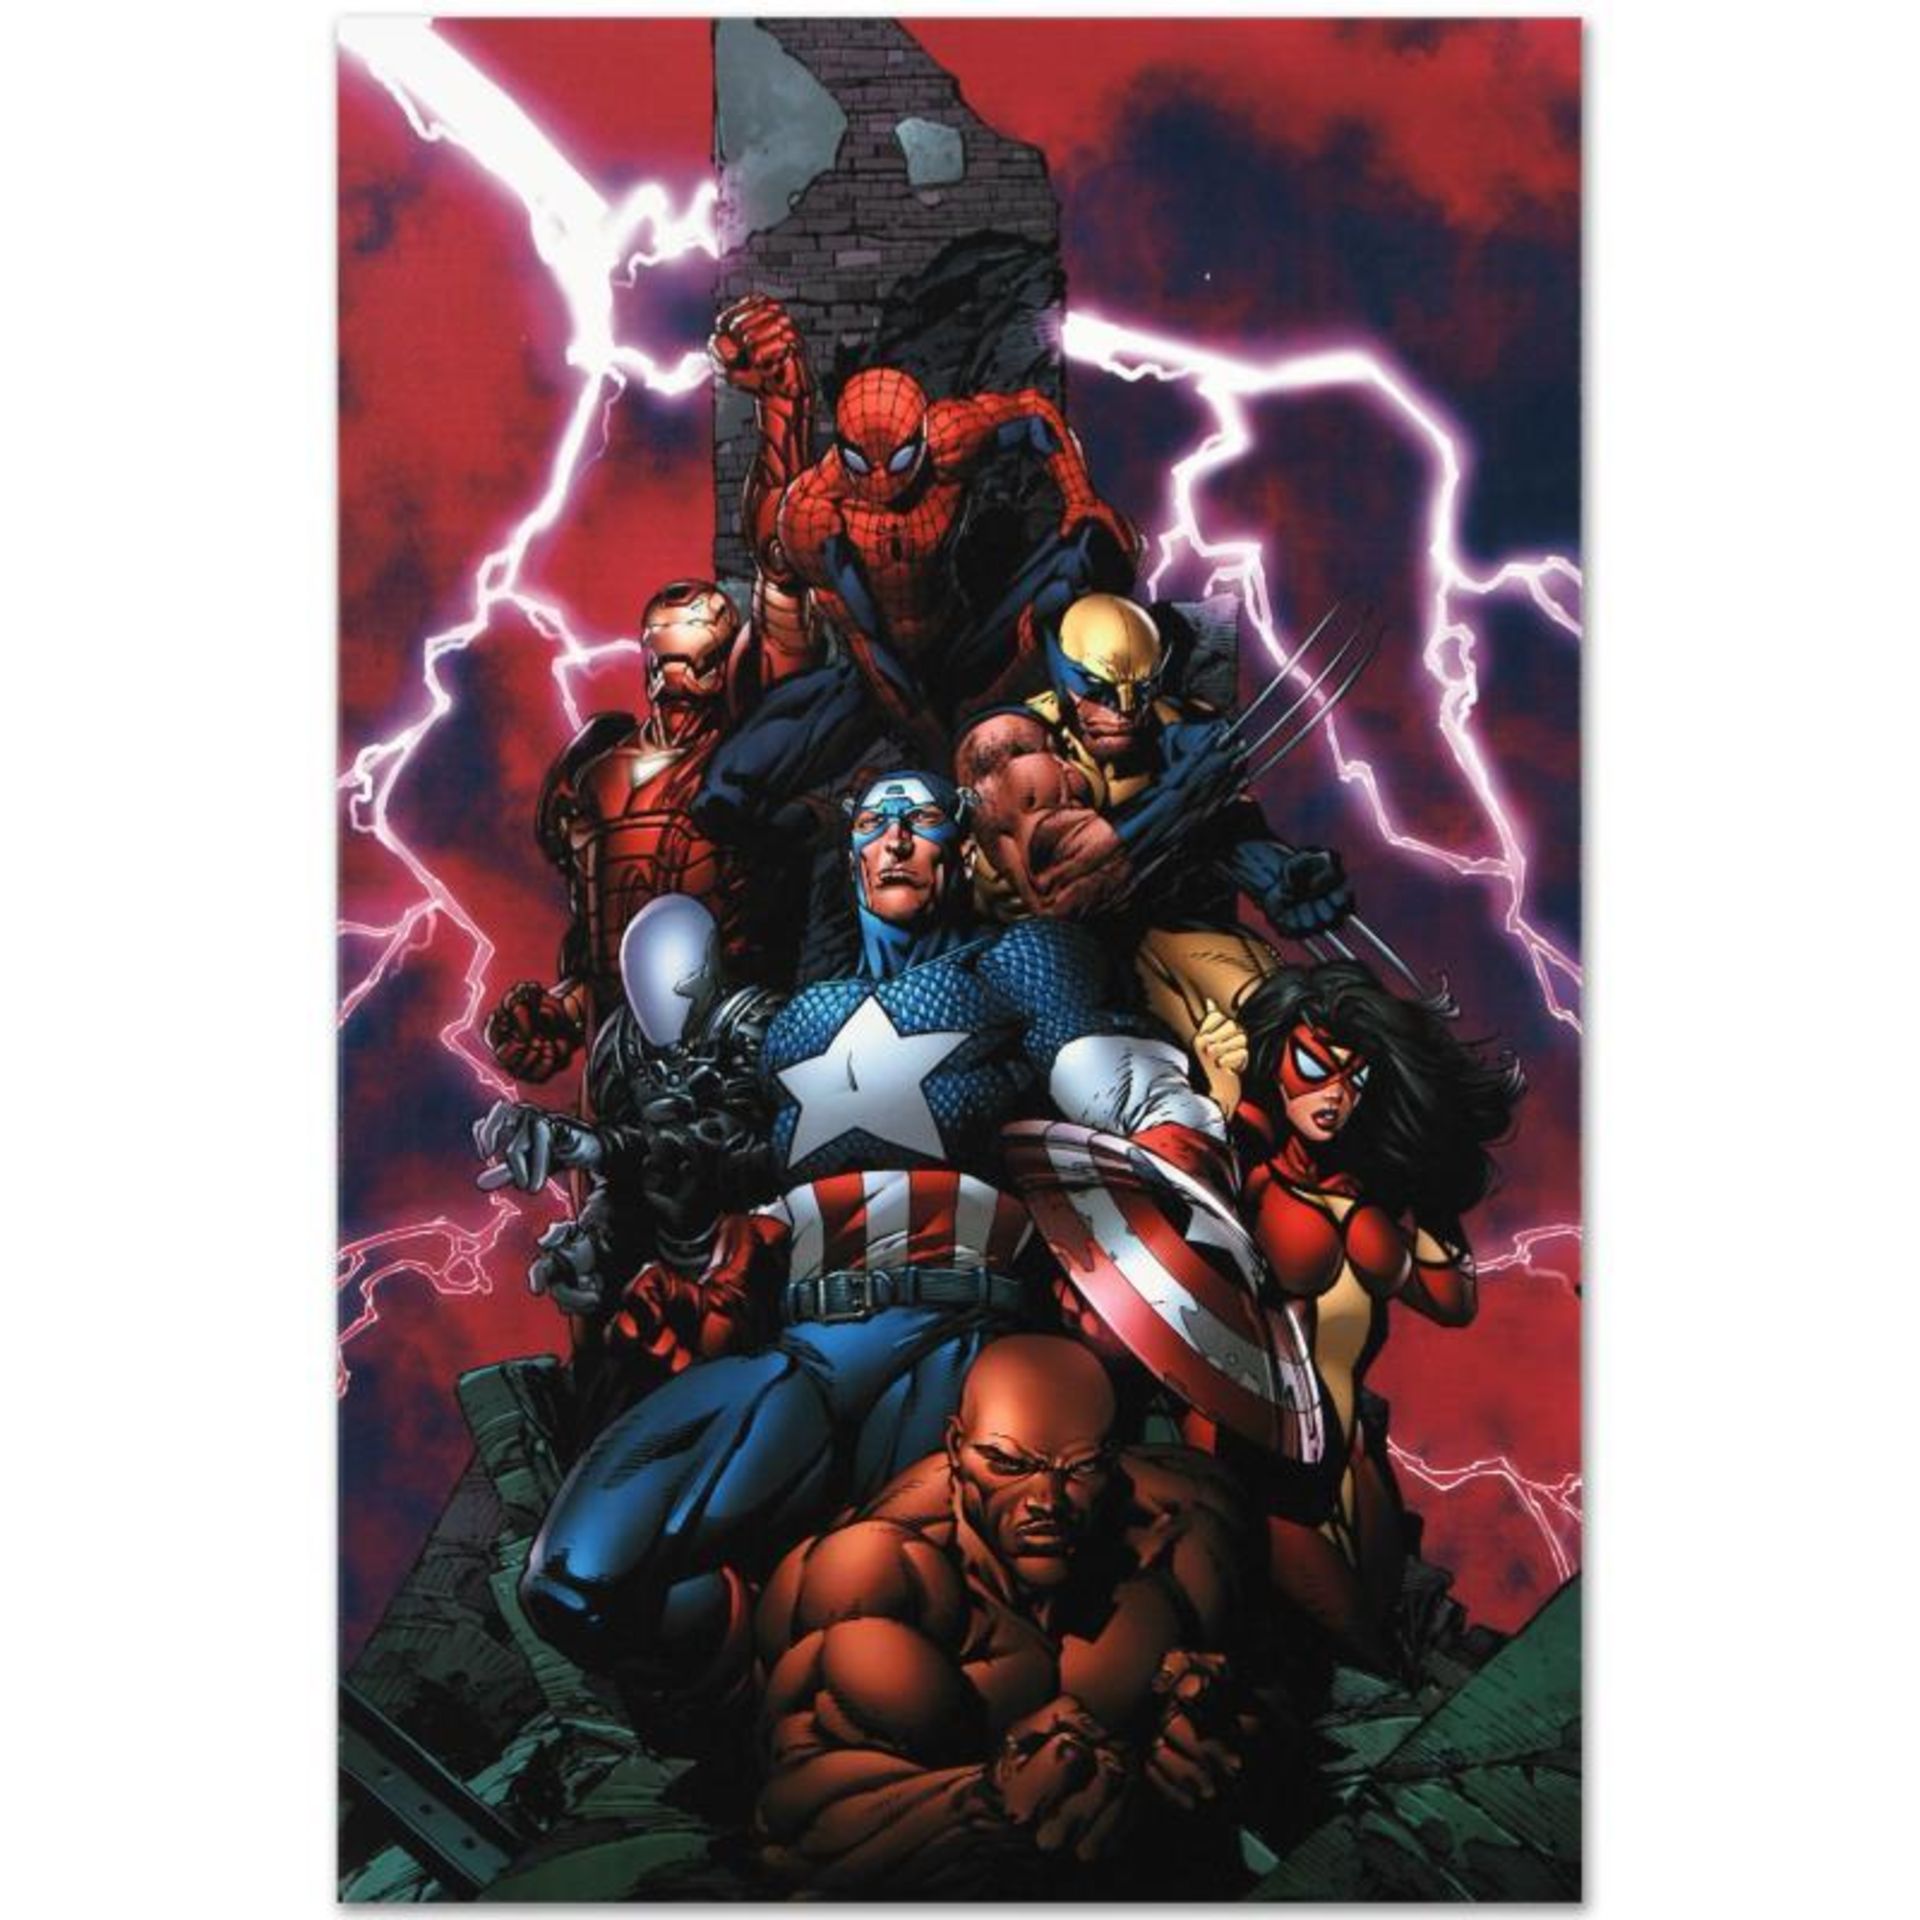 Marvel Comics "New Avengers #1" Numbered Limited Edition Giclee on Canvas by Dav